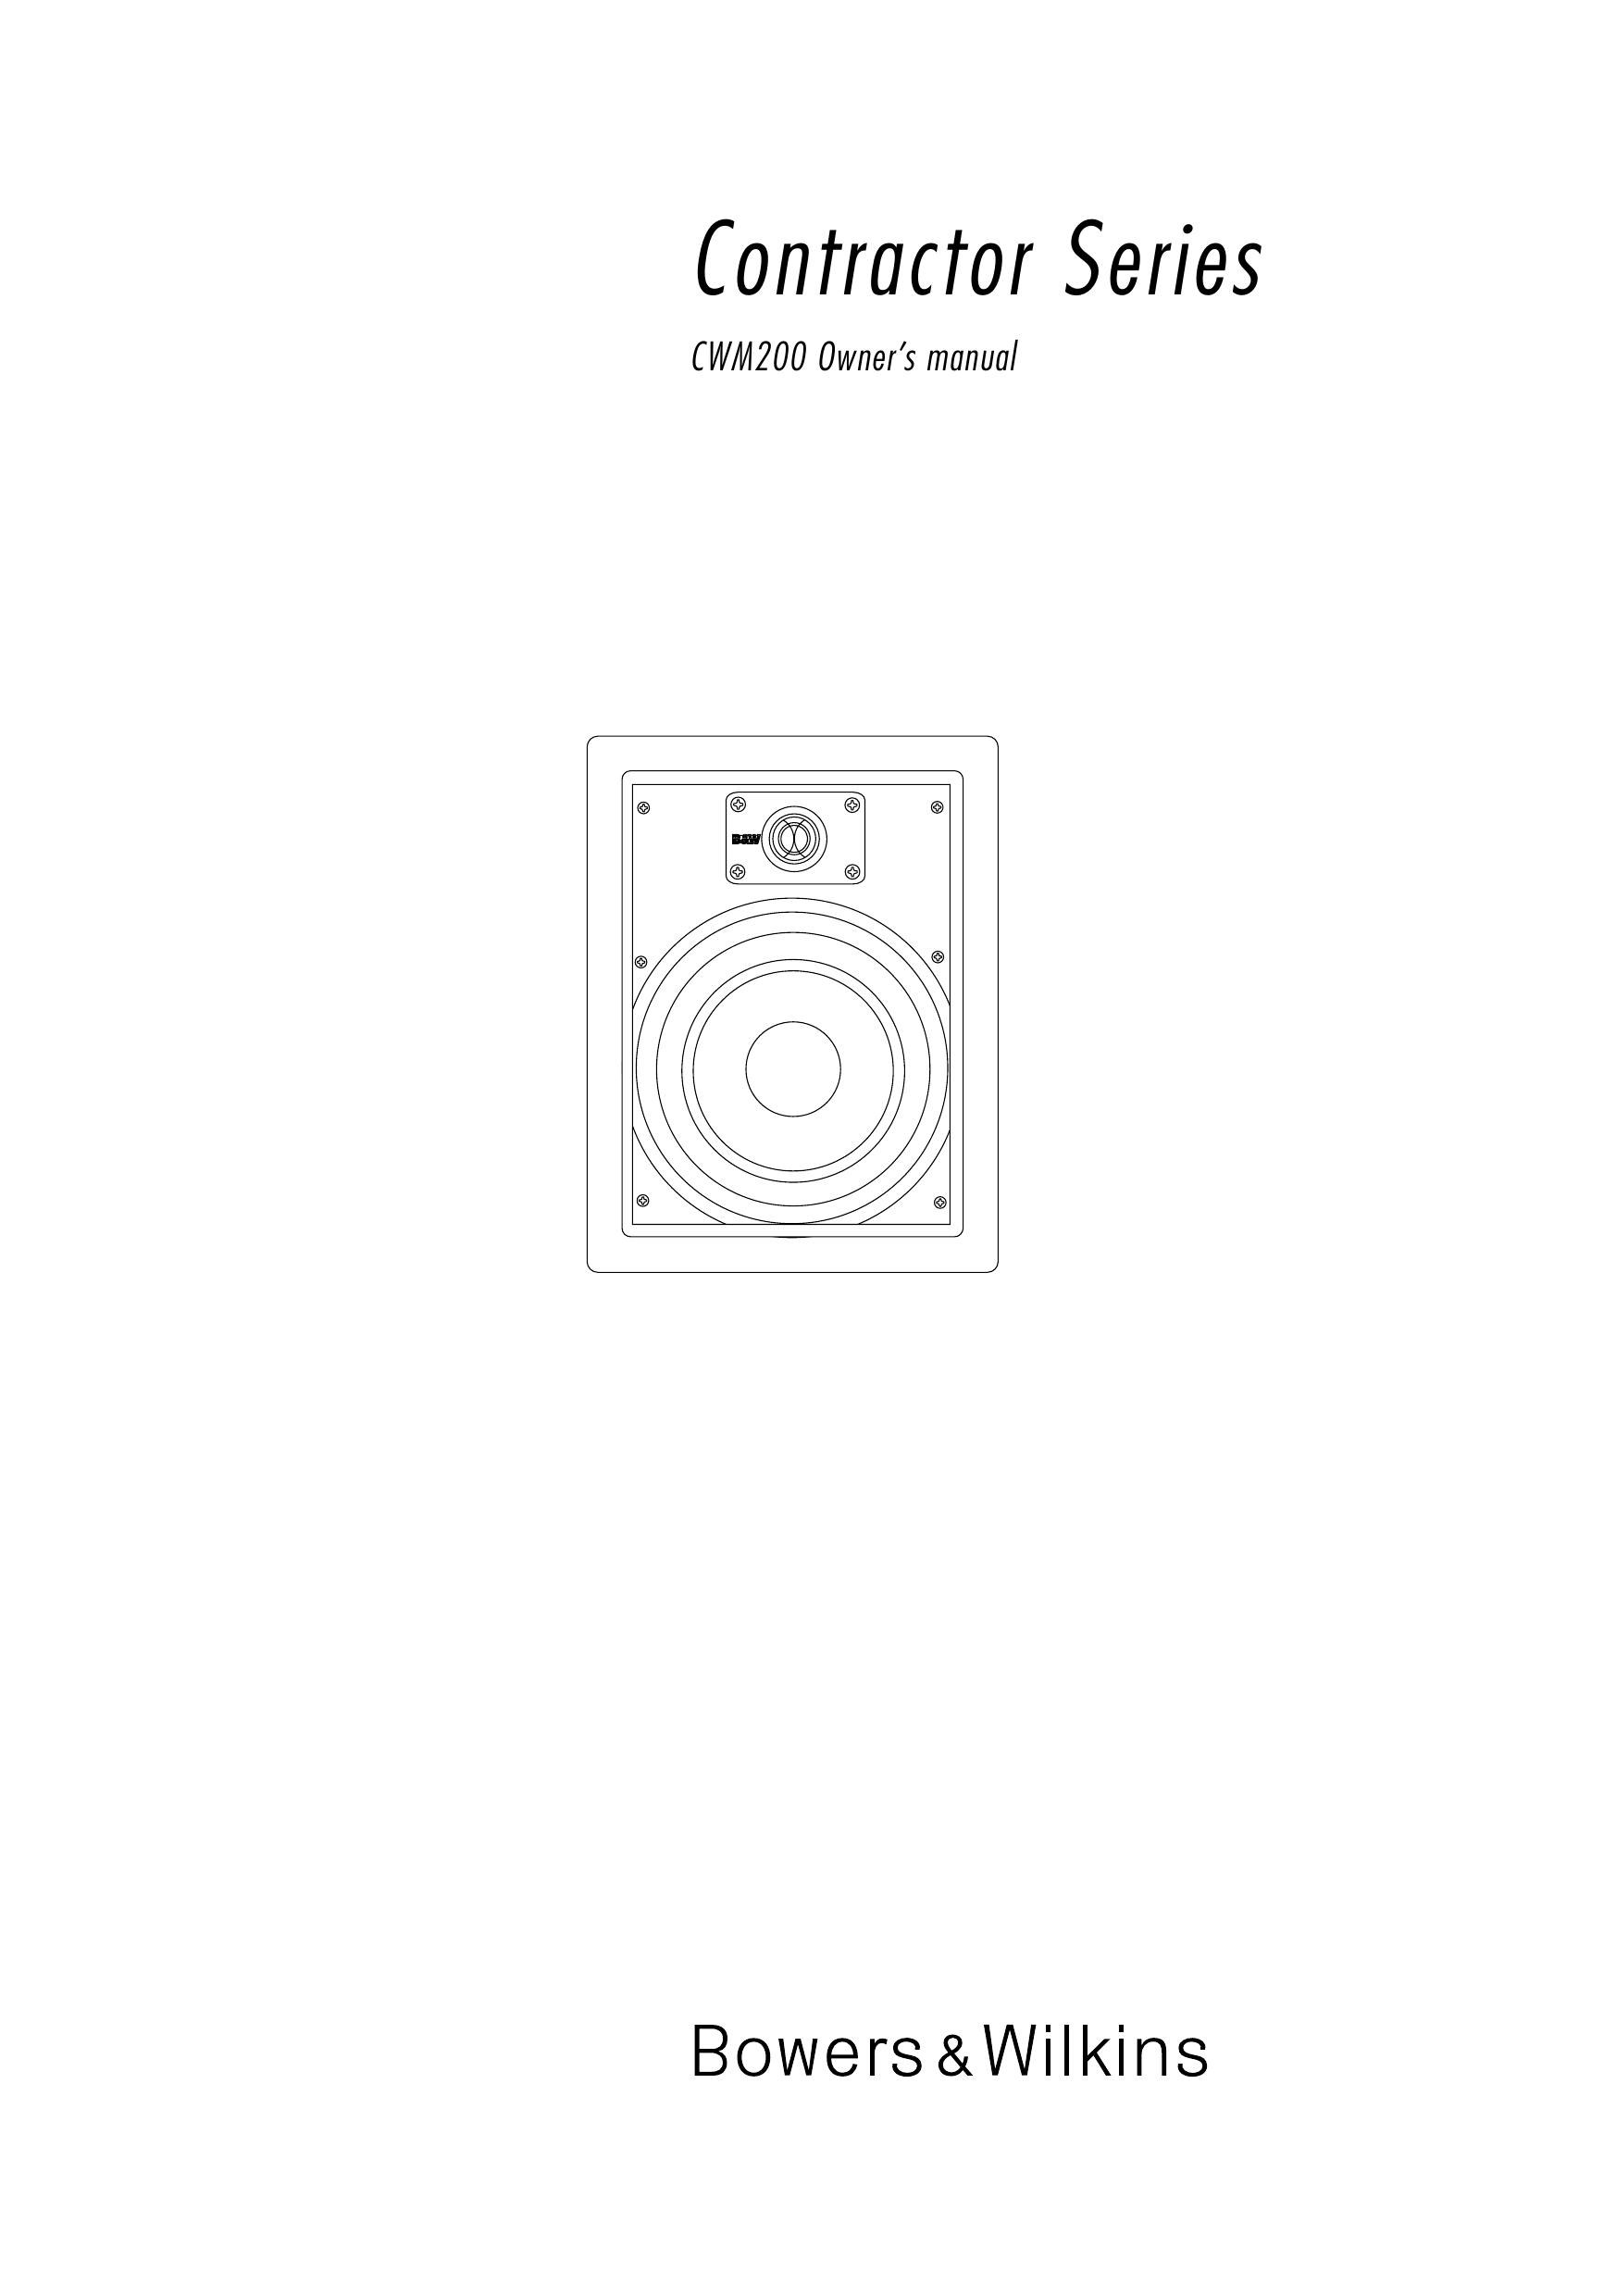 Bowers & Wilkins CWM200 Insect Control Equipment User Manual